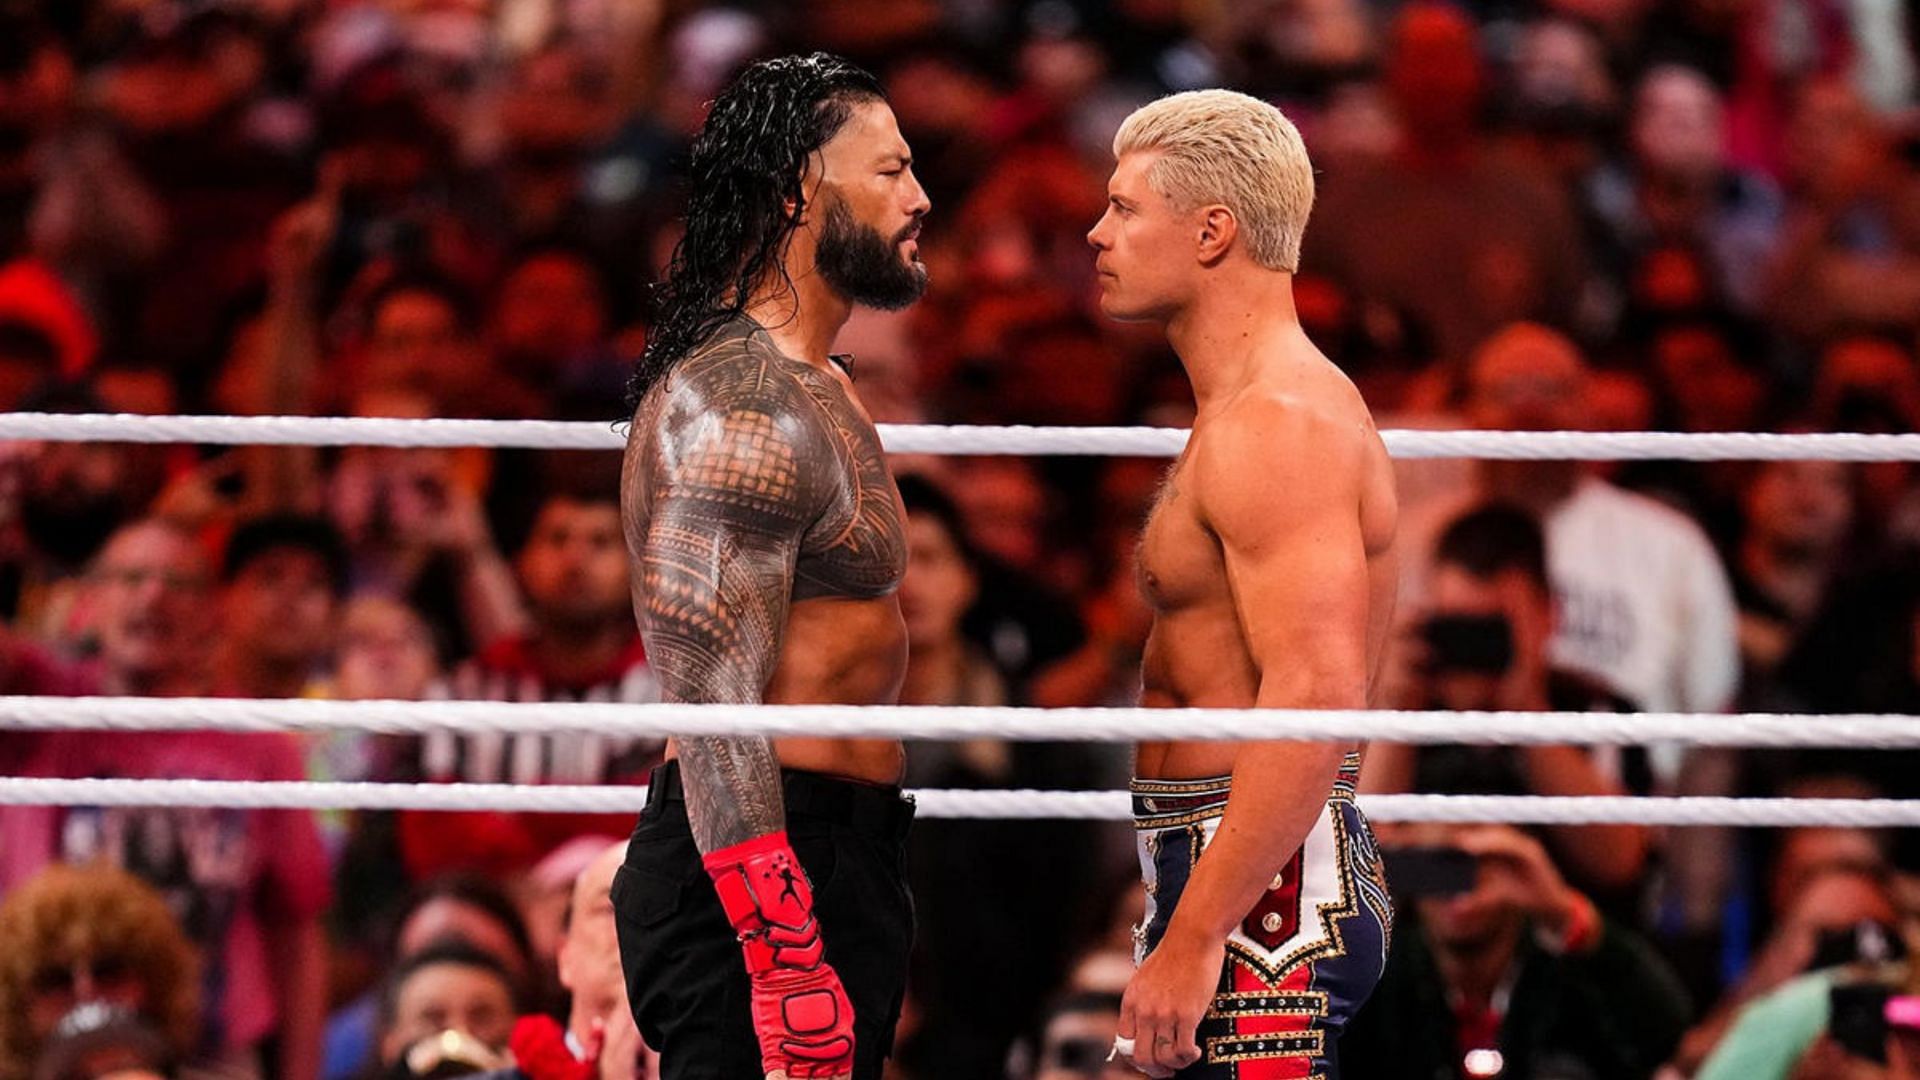 Undisputed WWE Universal Champion Roman Reigns and Cody Rhodes